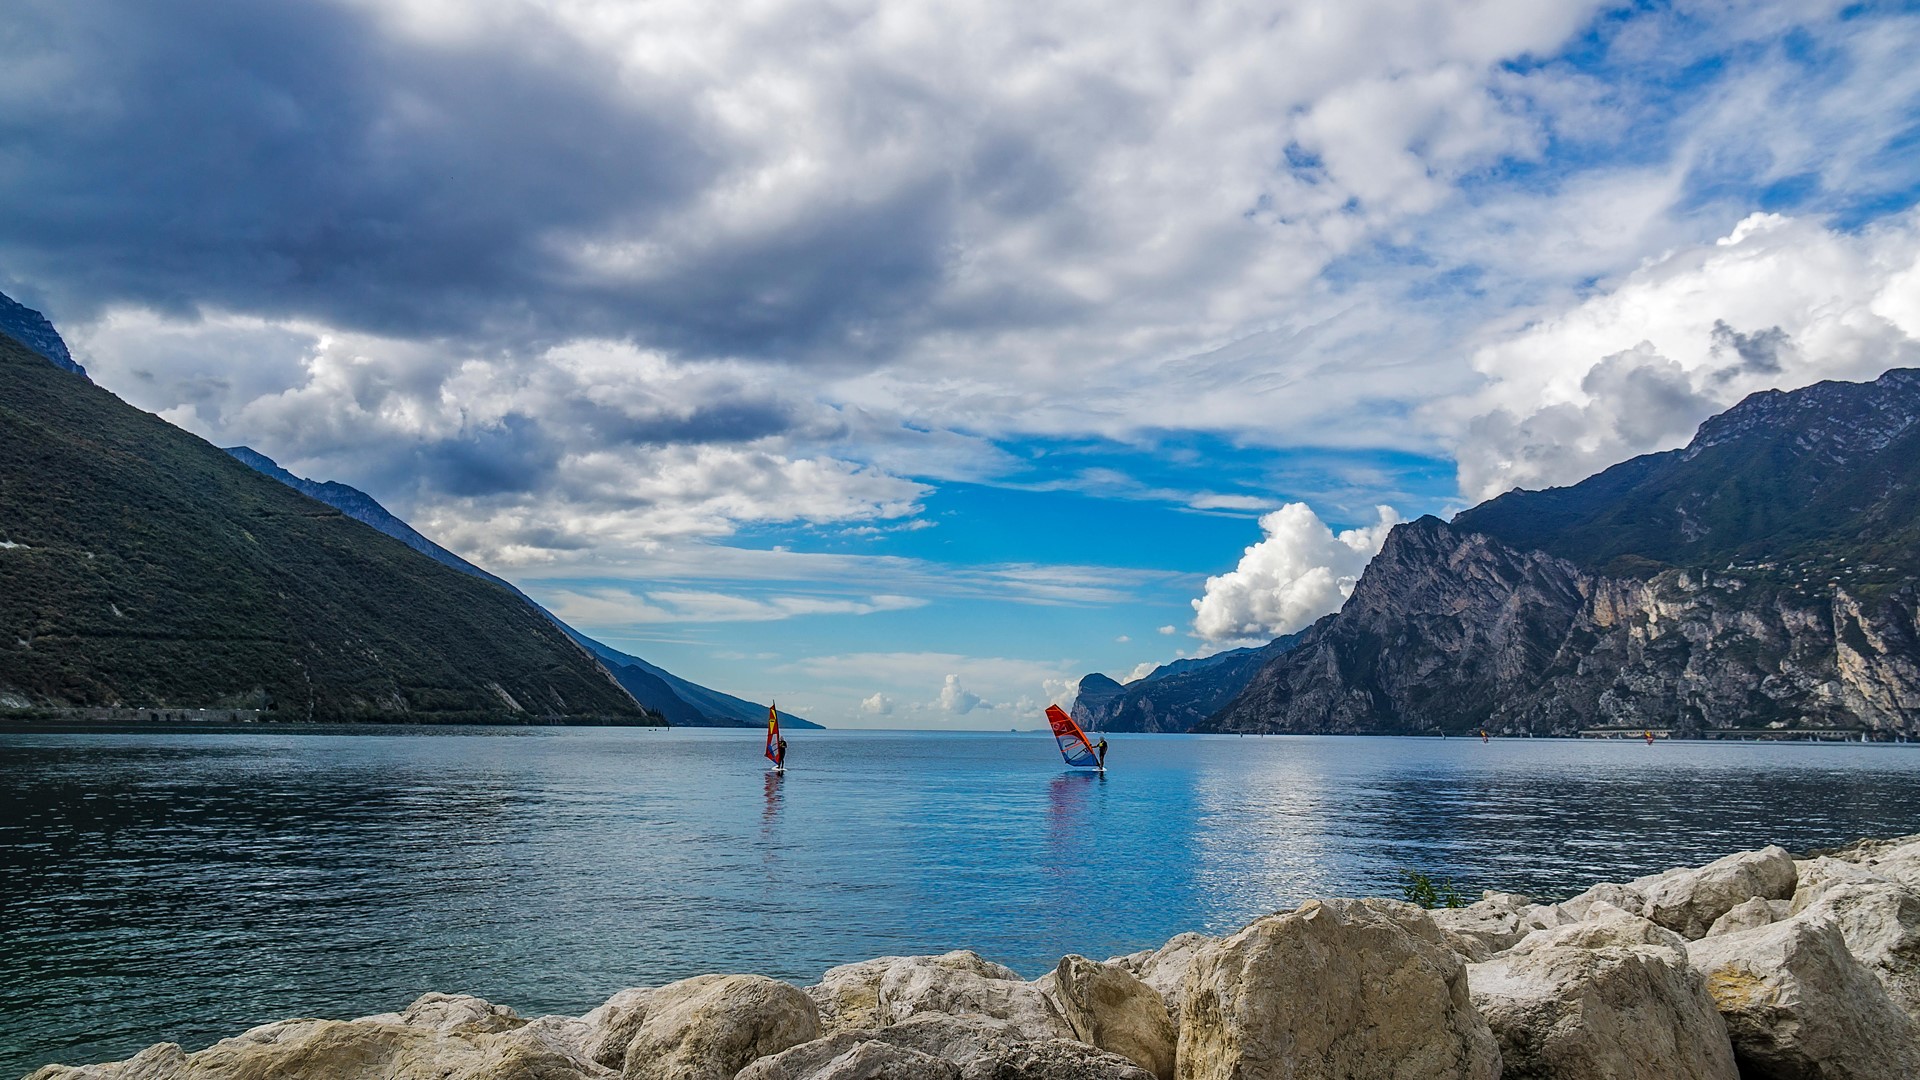 Nature Landscape Clouds Sky Rocks Water Mountains Lake Garda Italy Surfers 1920x1080